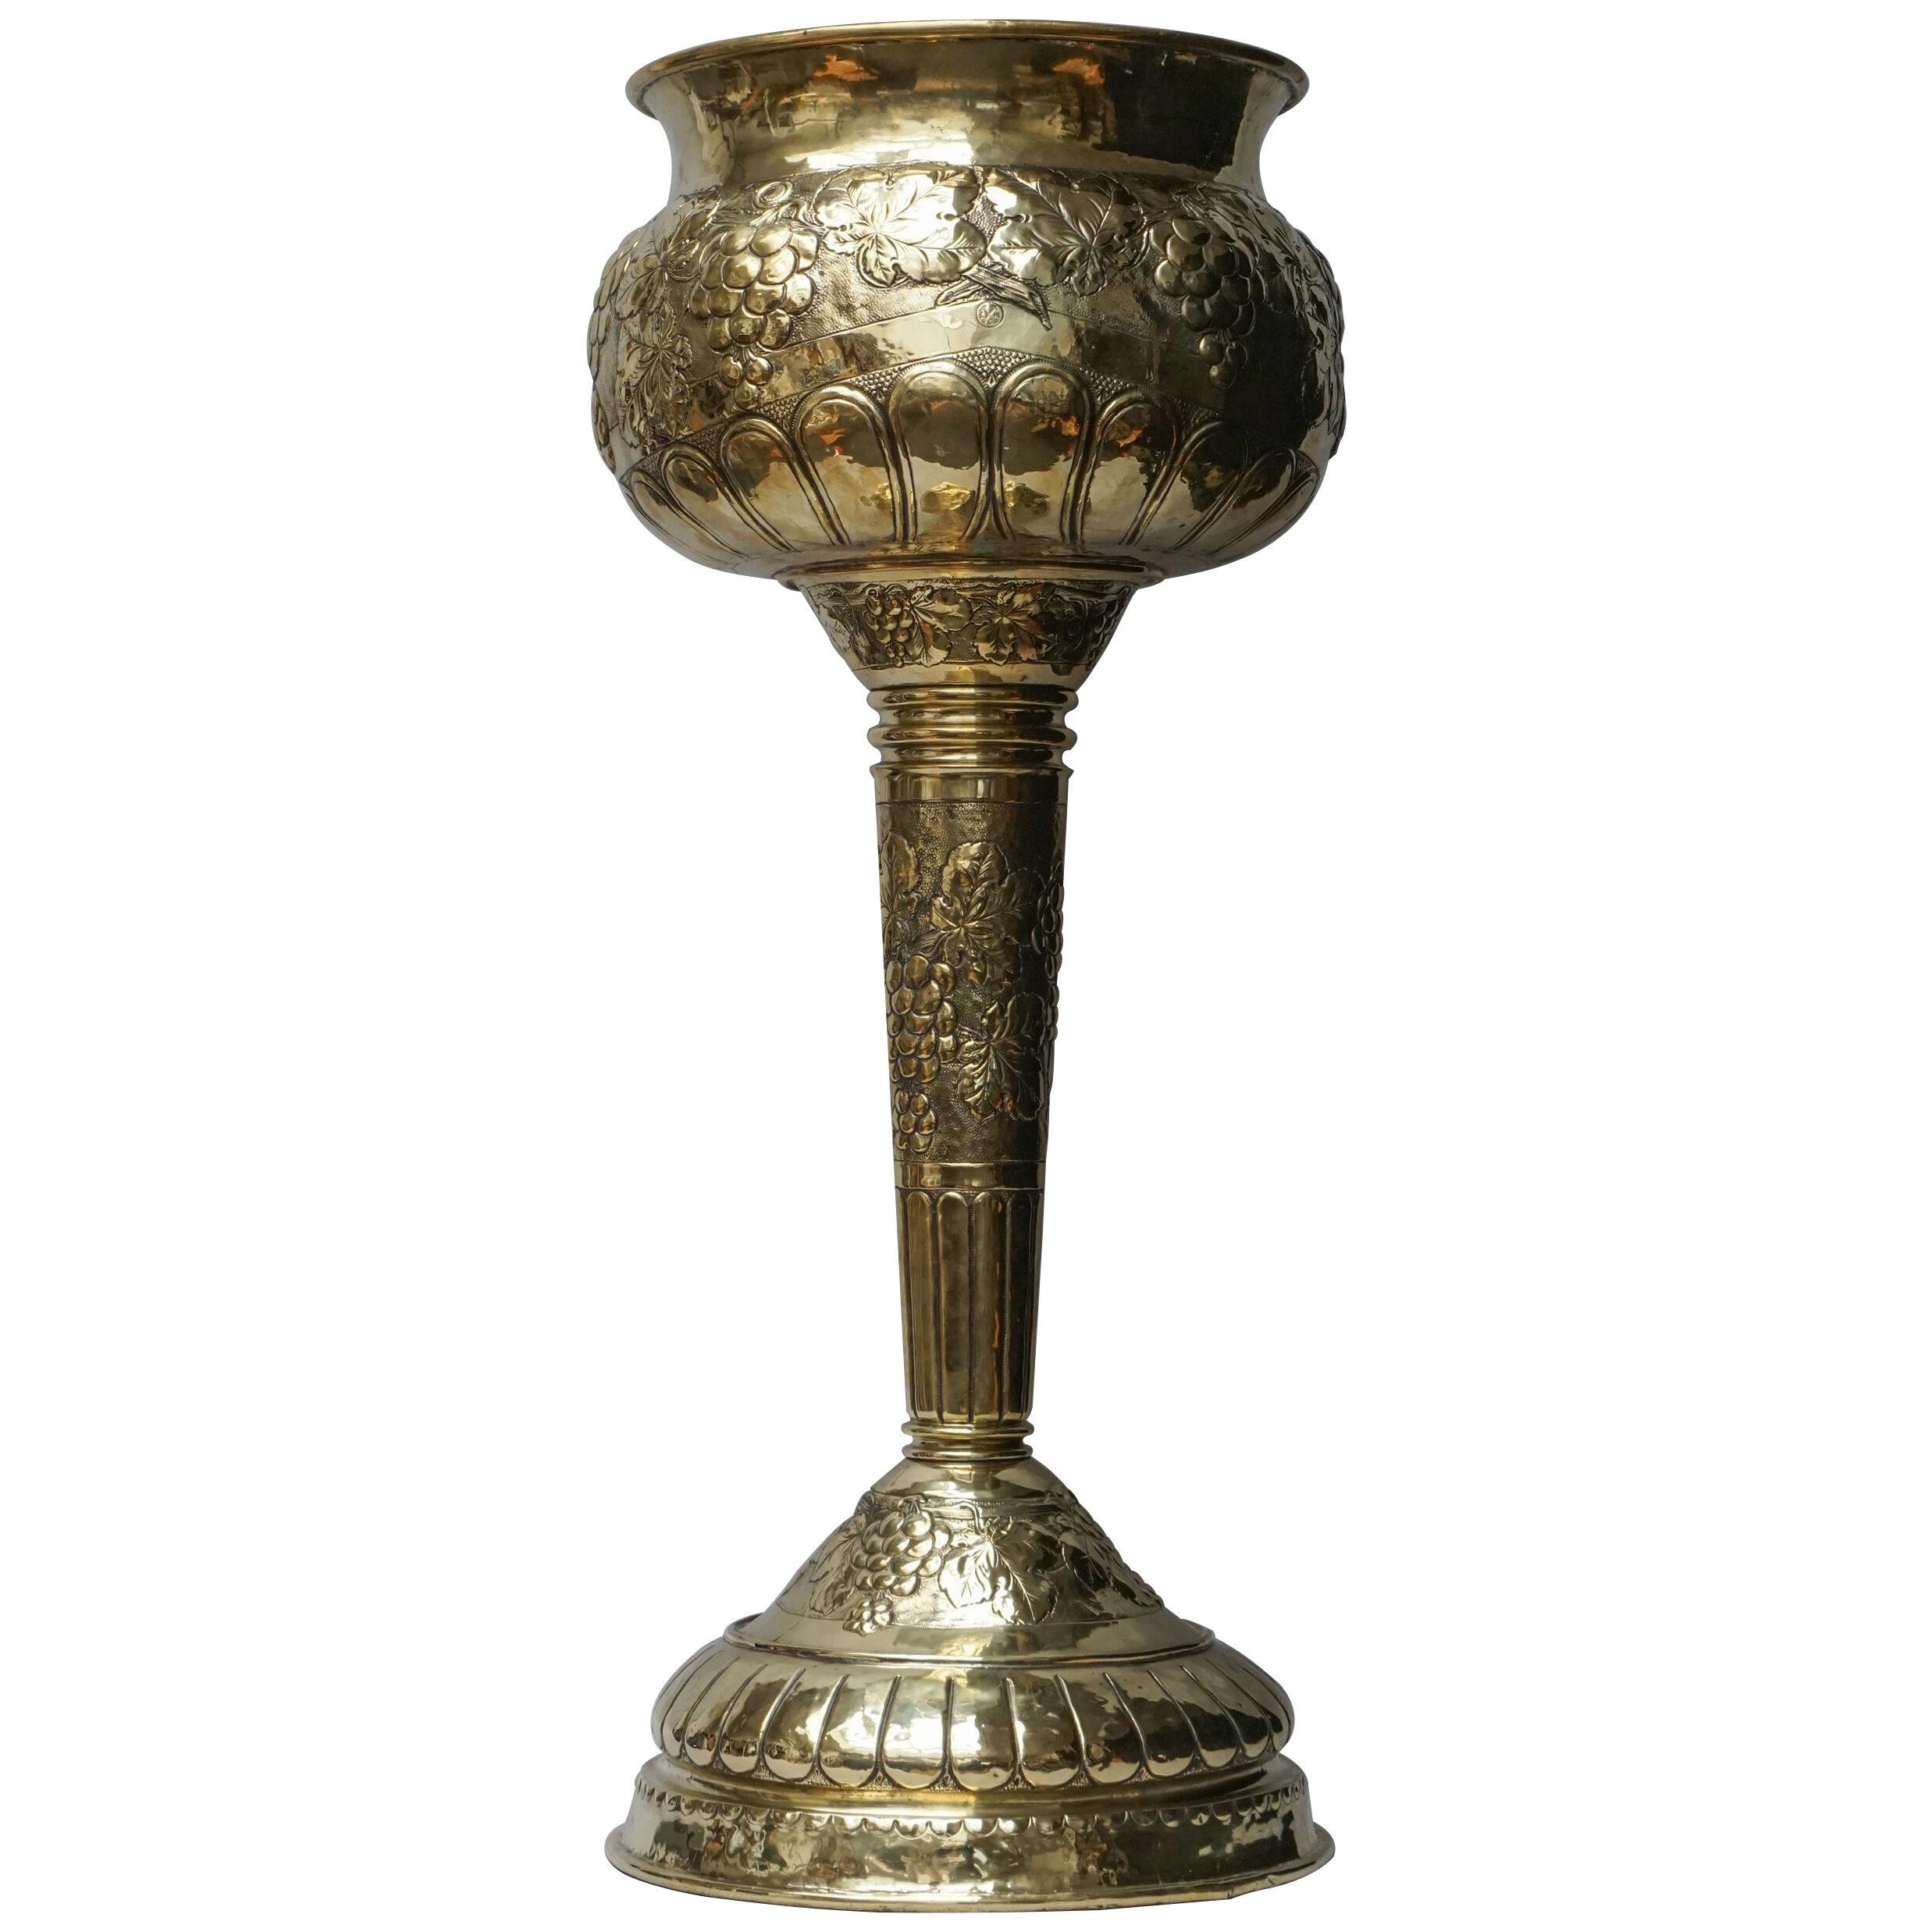 19th Century Large Dutch Embossed Brass Cachepot Jardinière or Champagne Cooler